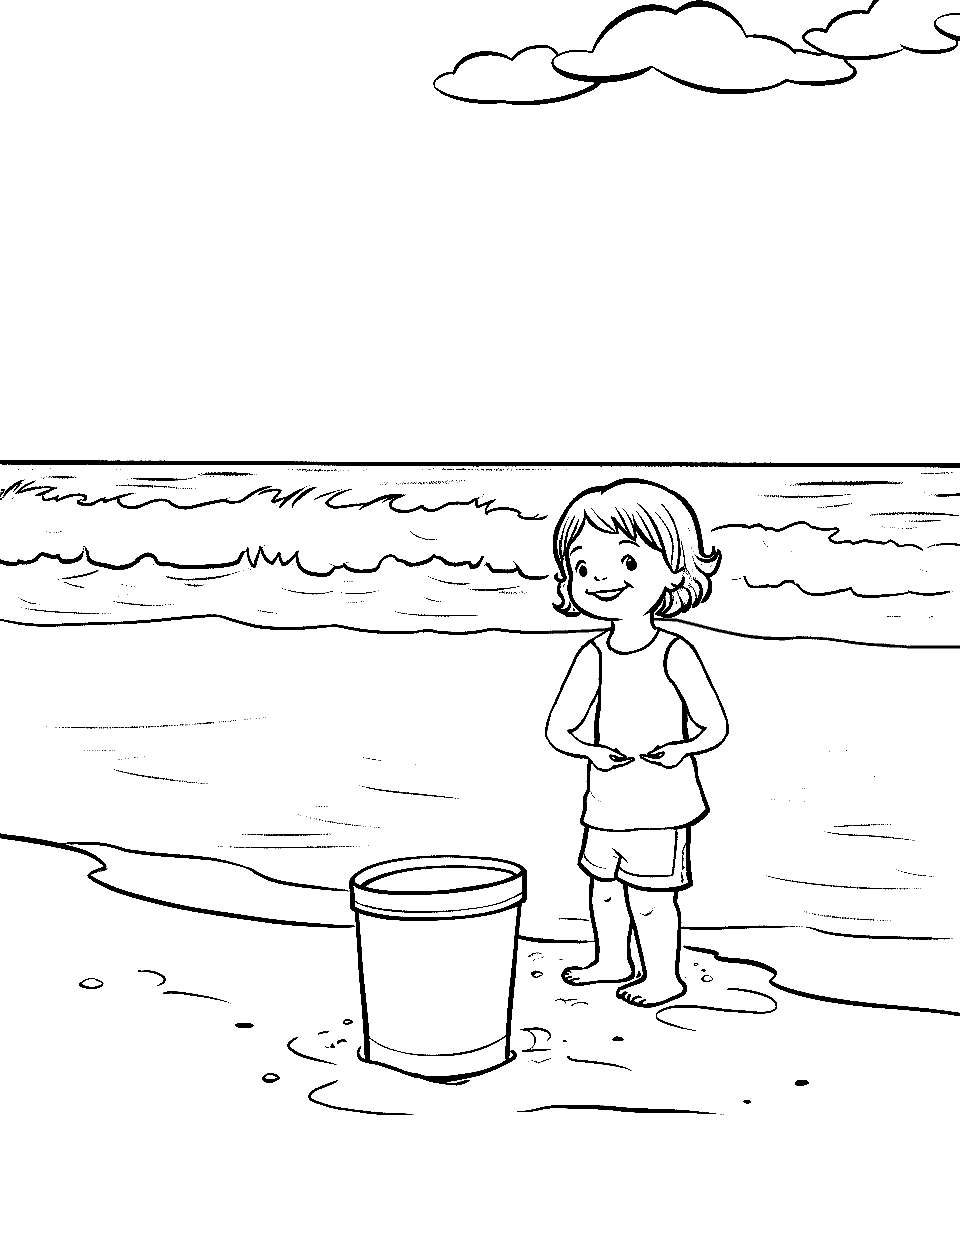 Toddler’s First Beach Day Coloring Page - A happy toddler playing in the gentle shoreline surf.